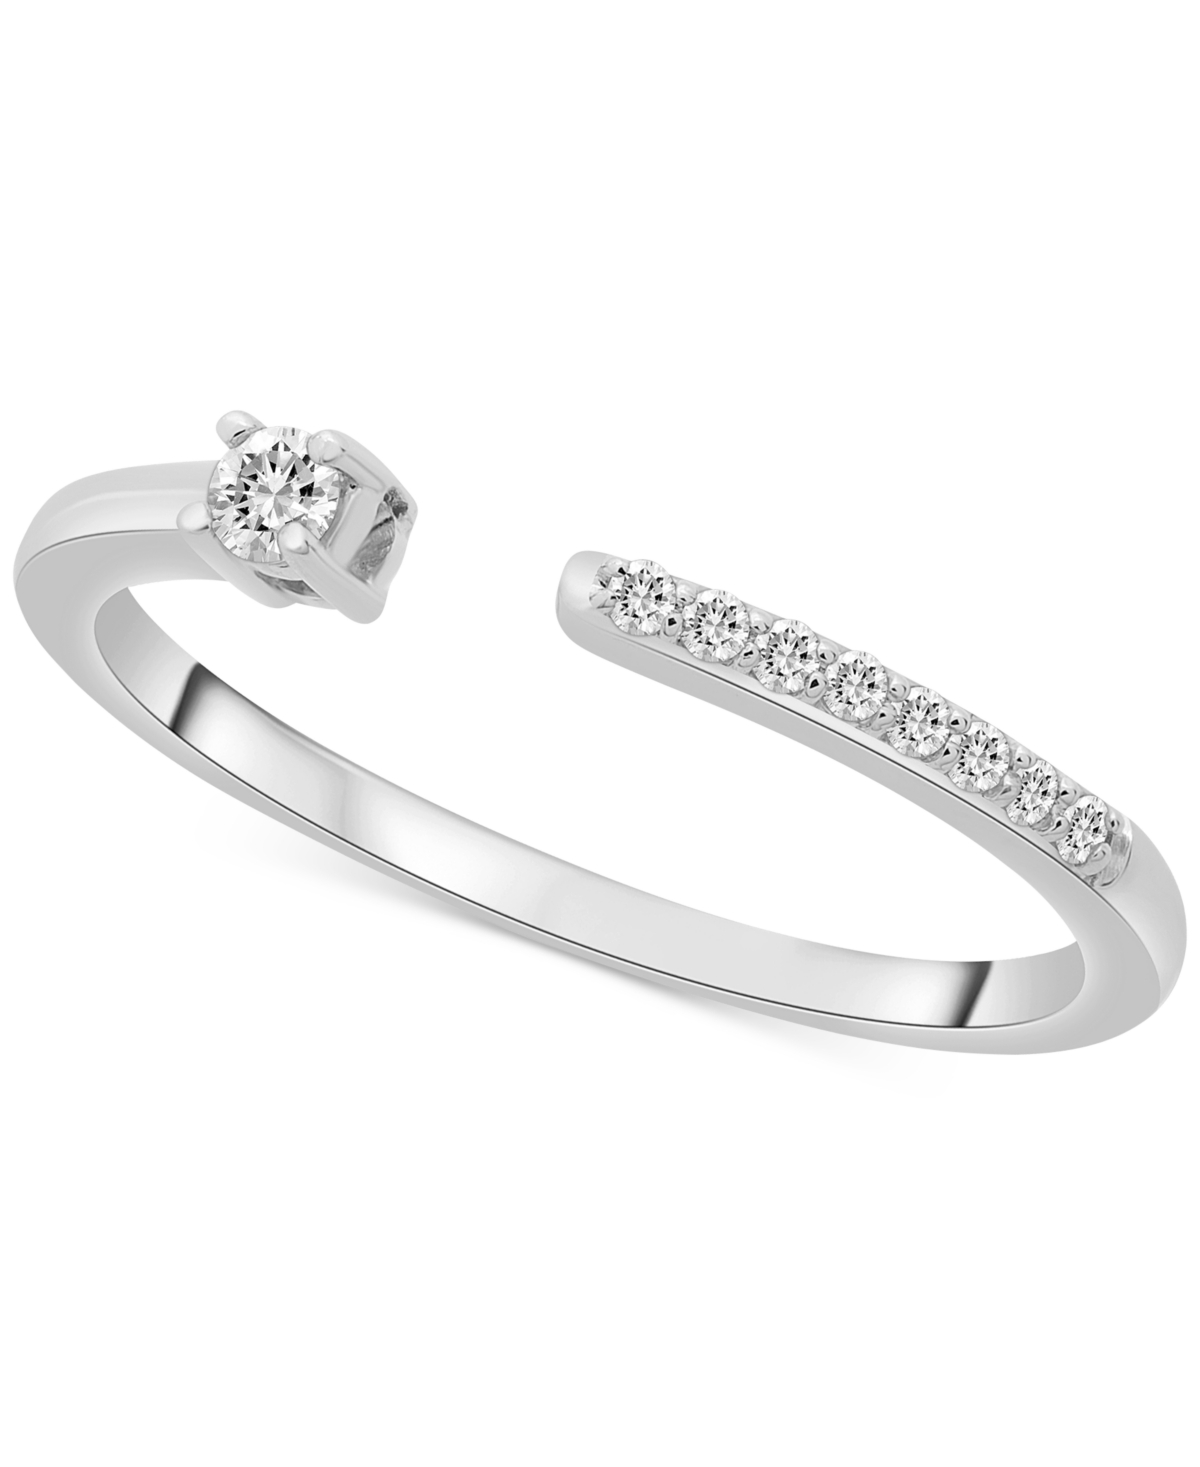 Diamond Cuff Statement Ring (1/10 ct. t.w.) in 14k Yellow or White Gold, Created for Macy's - White Gold